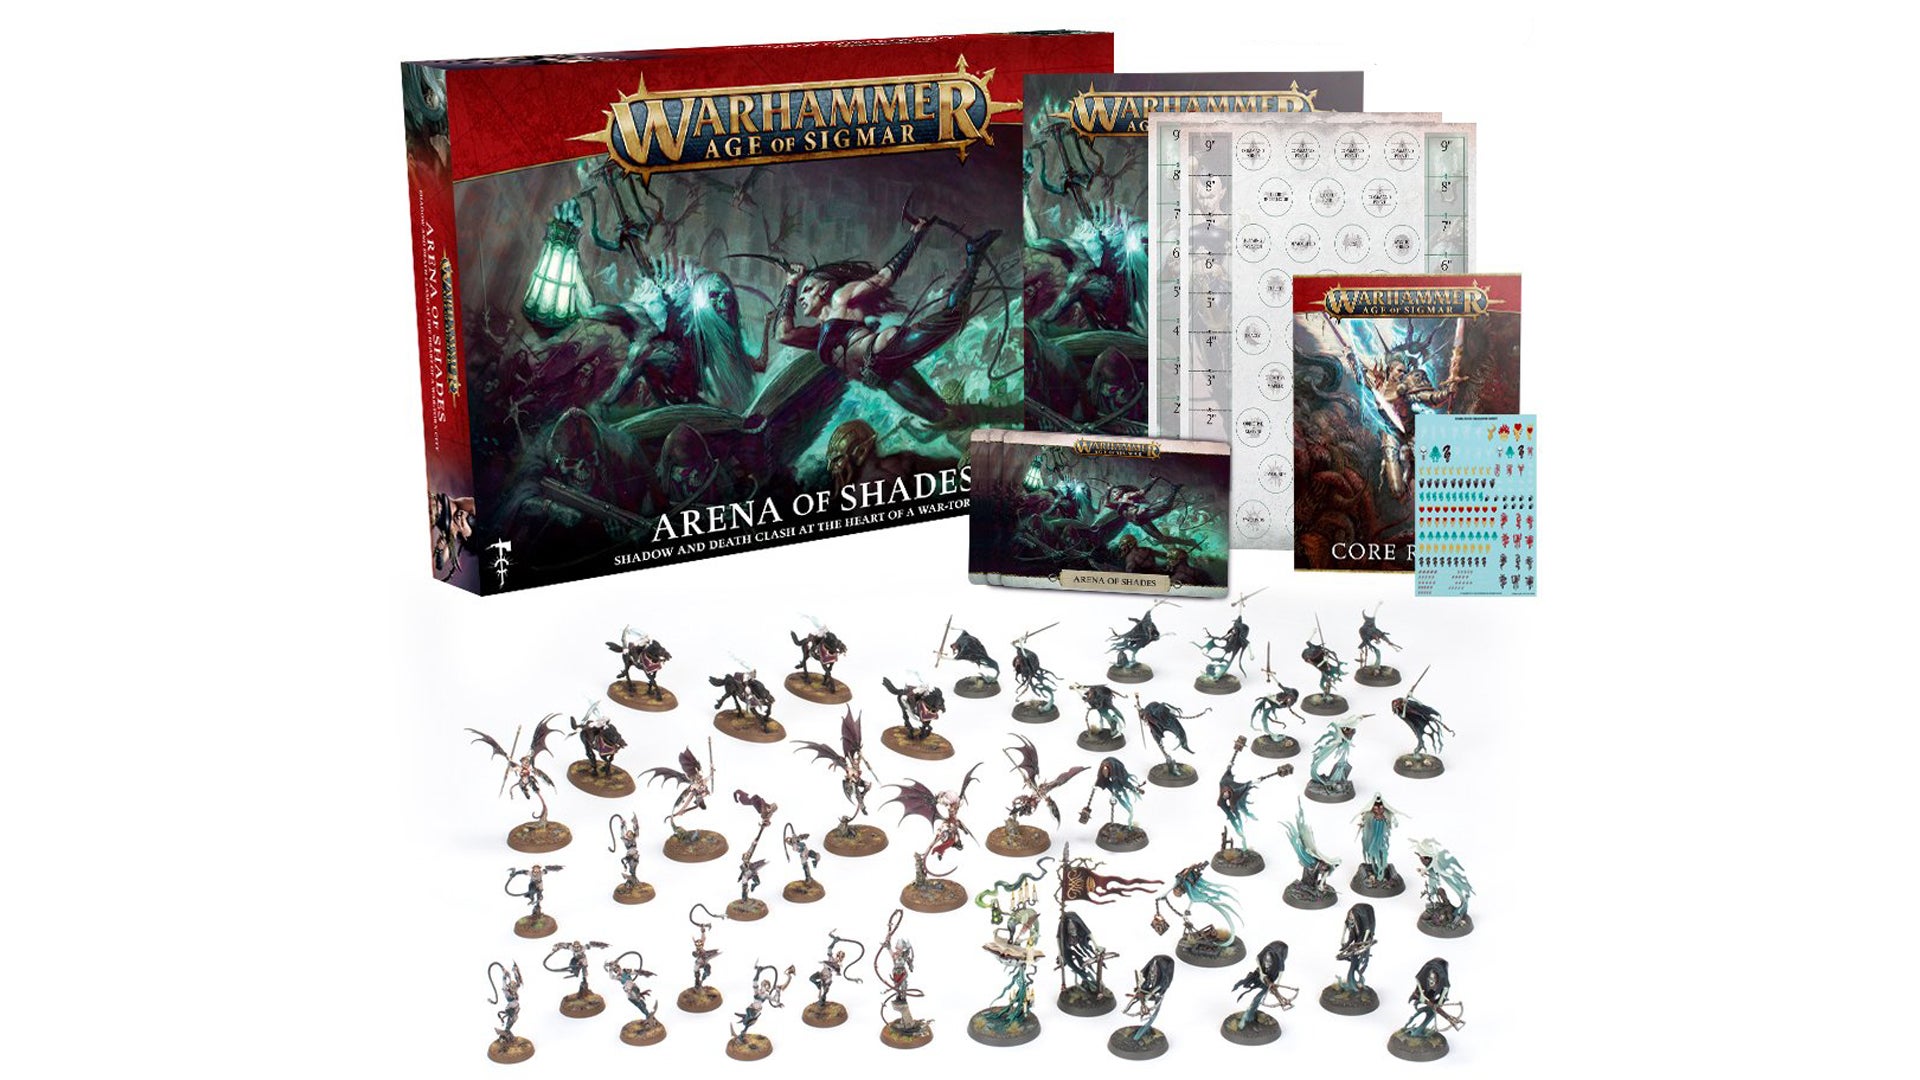 The Arena of Shades box for Warhammer: Age of Sigmar